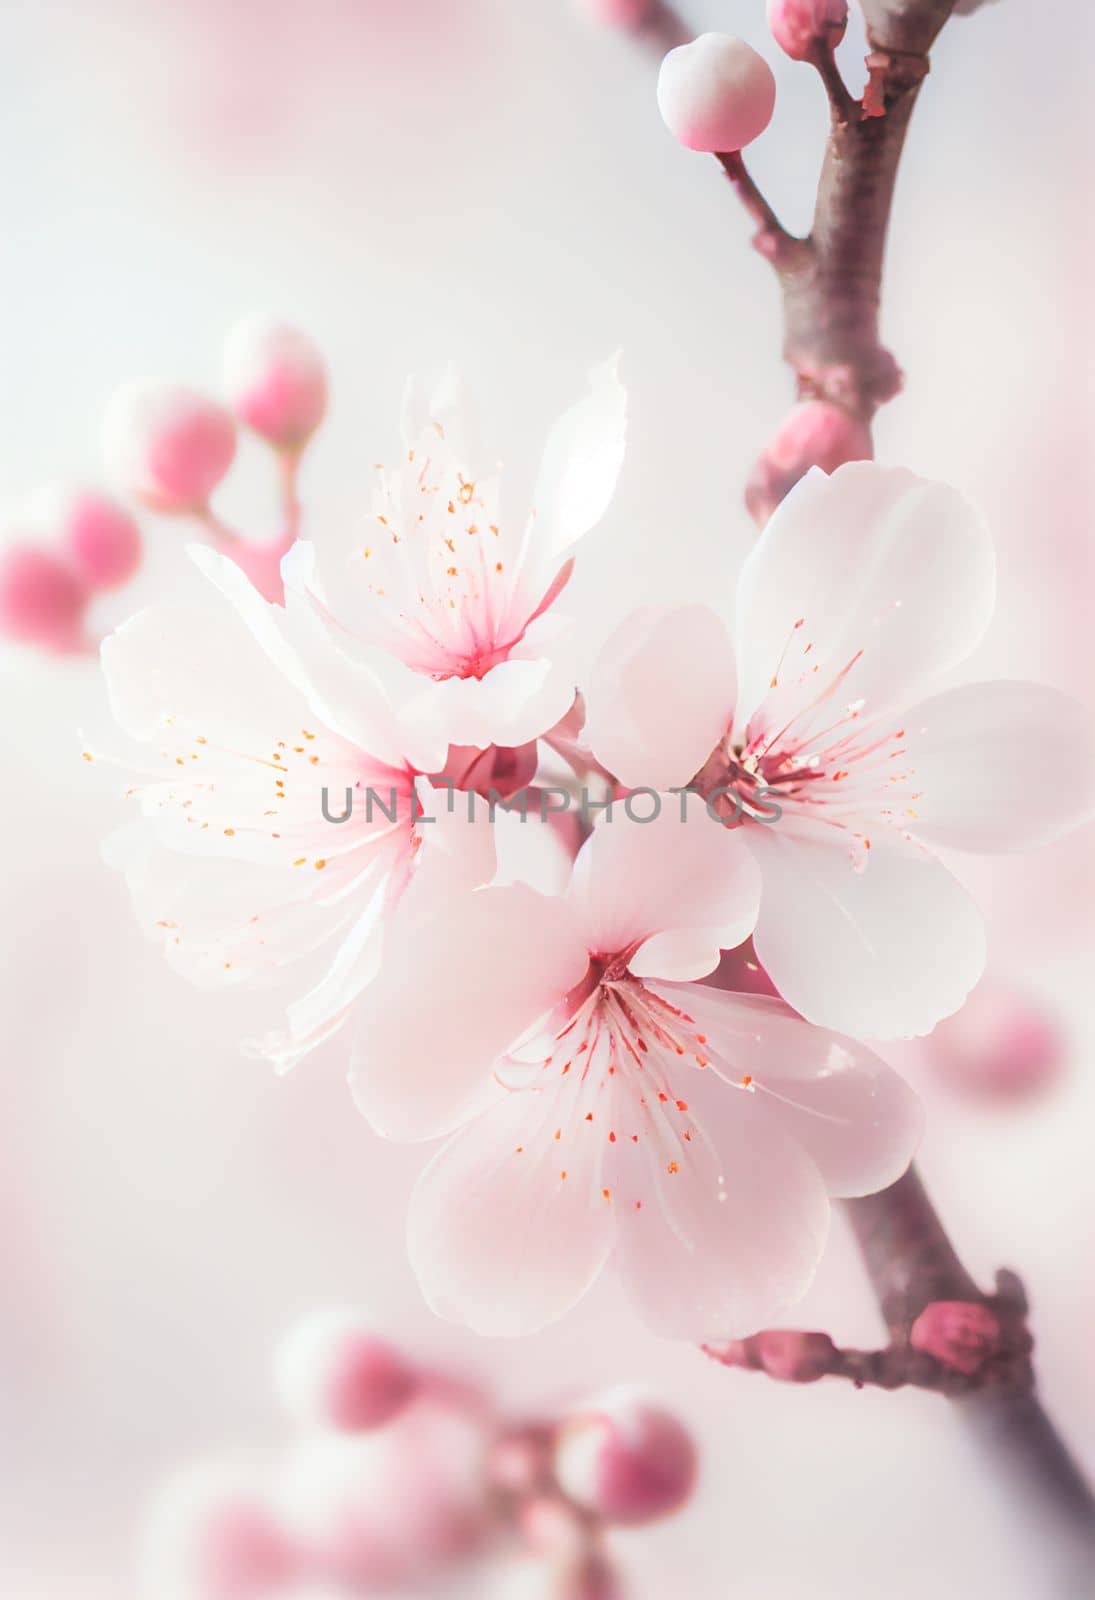 Spring cherry blossom against pastel pink and white background. Shallow depth of field dreamy effect by FokasuArt